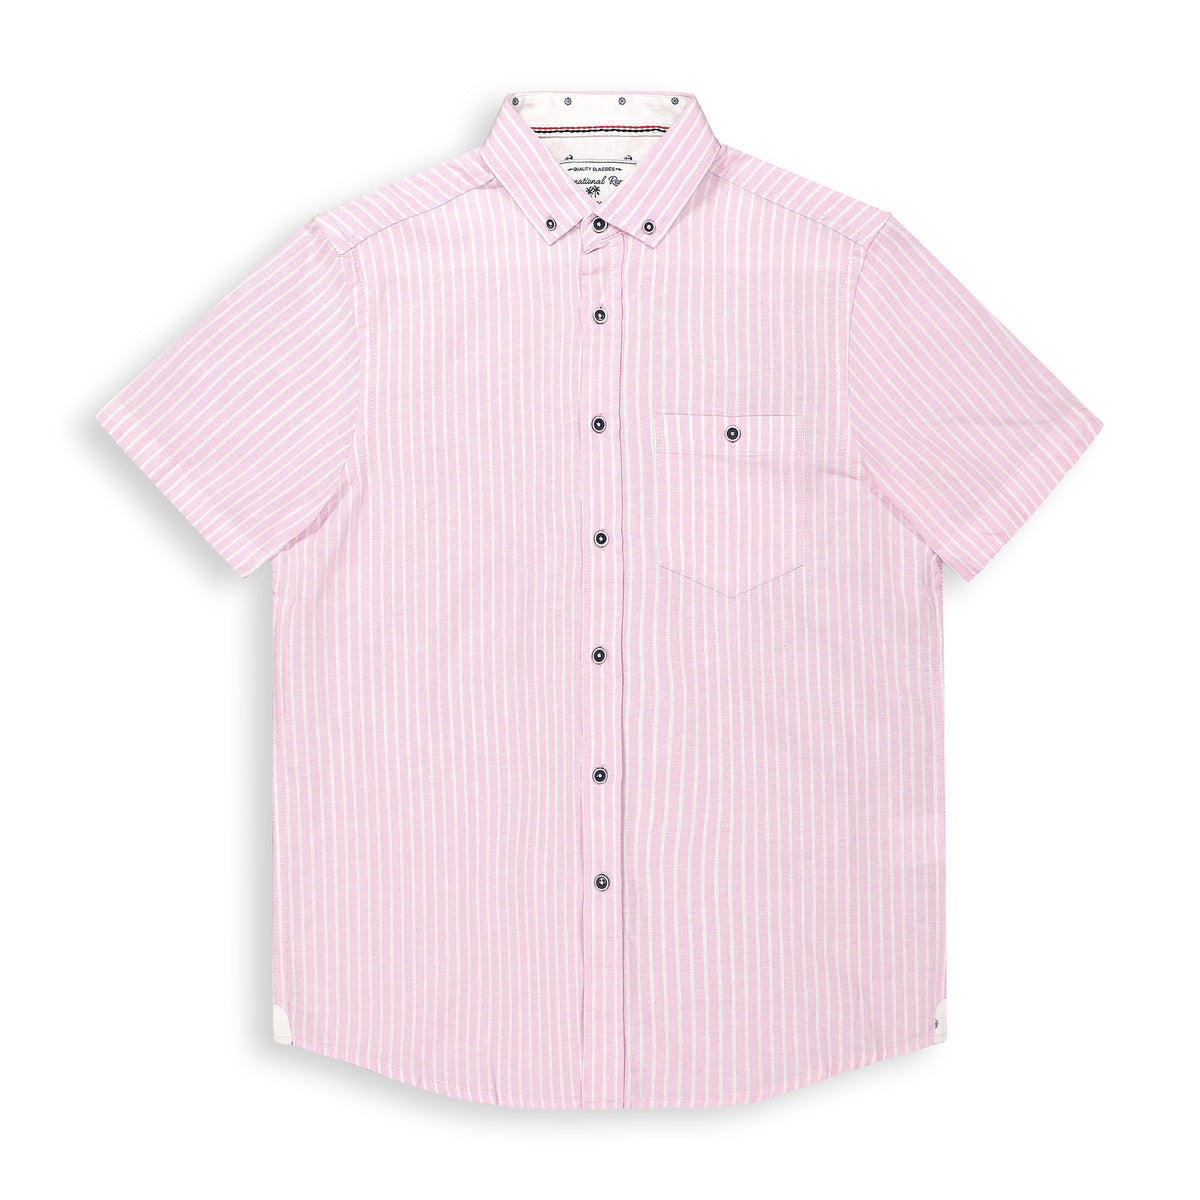 Front View of Short Sleeve Linen Blend Shirt with Stripes in Pink